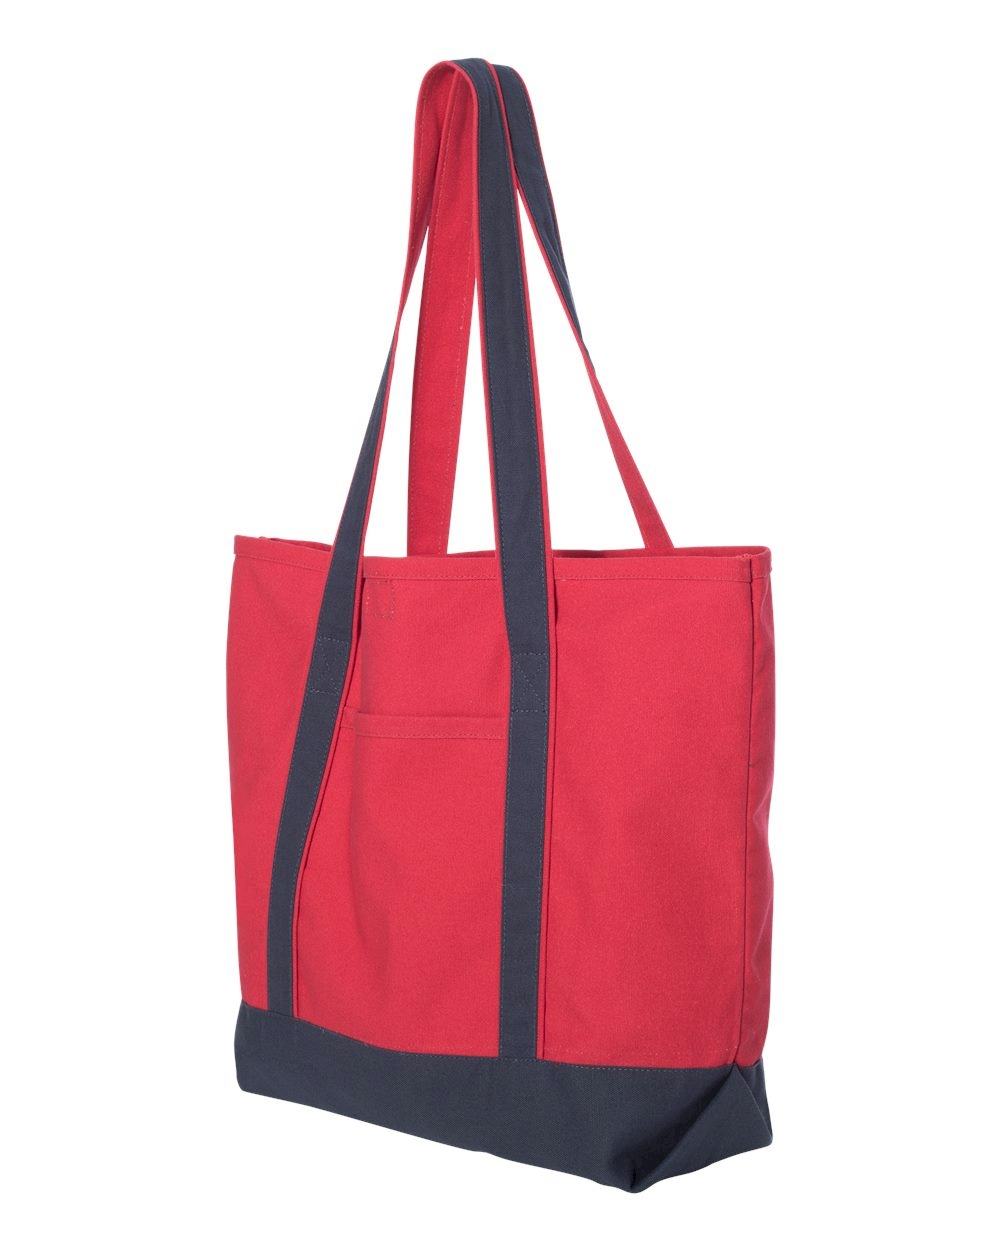 Beach Tote Bag Embroidery Blanks - RED/NAVY